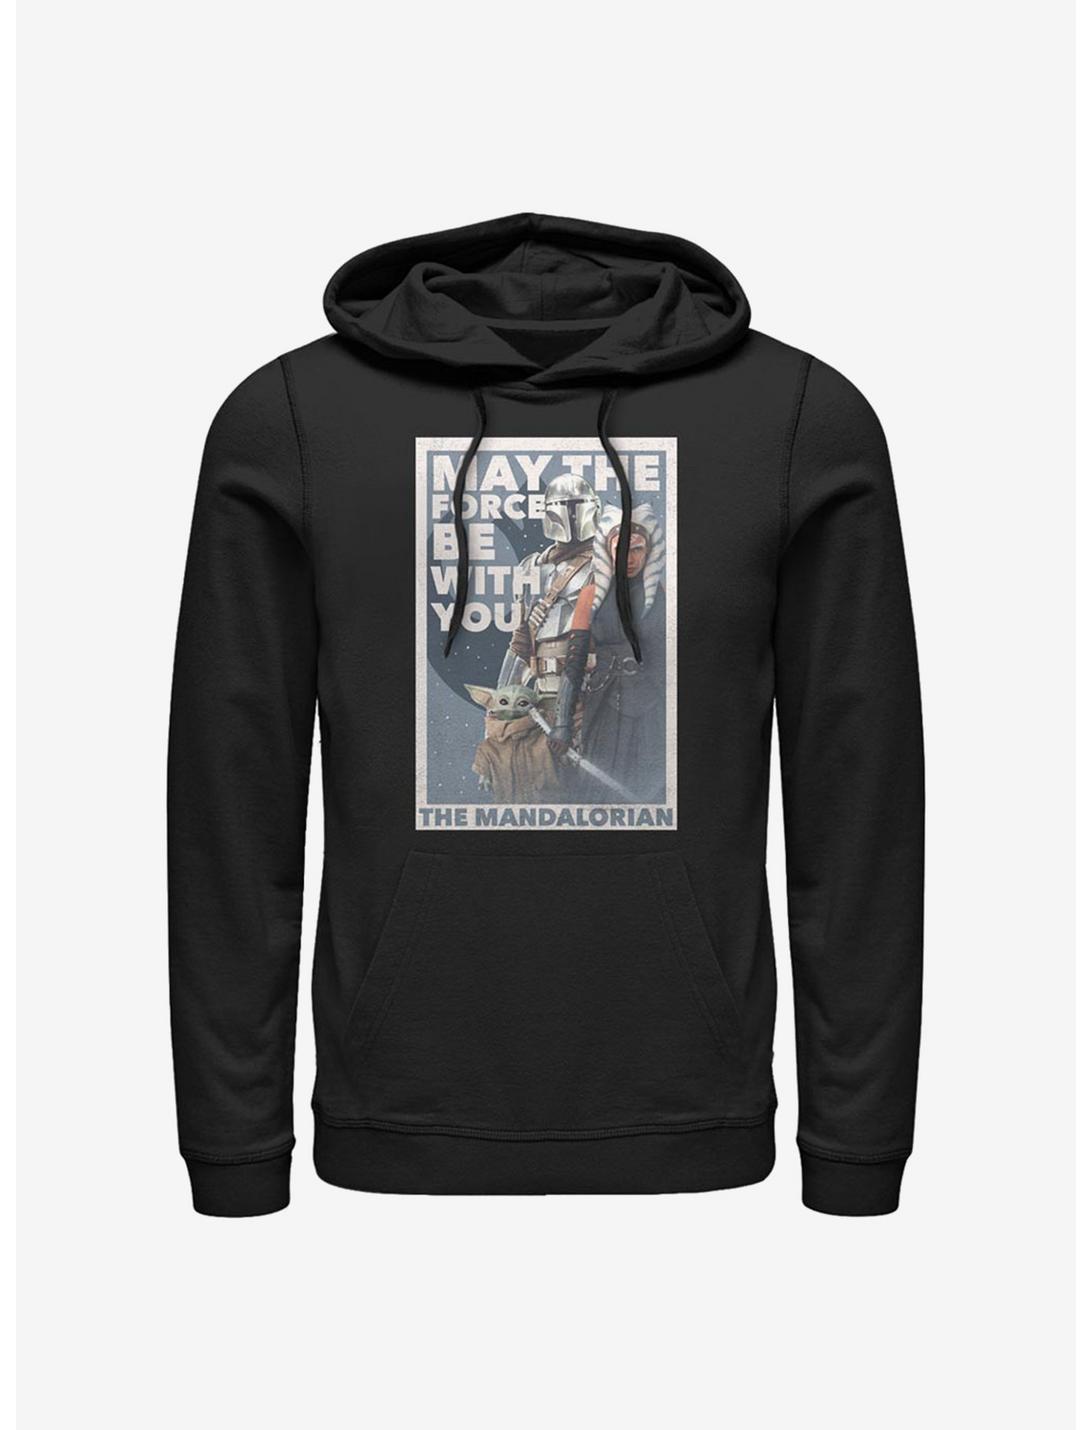 Star Wars The Mandalorian This Is The Force Hoodie, BLACK, hi-res